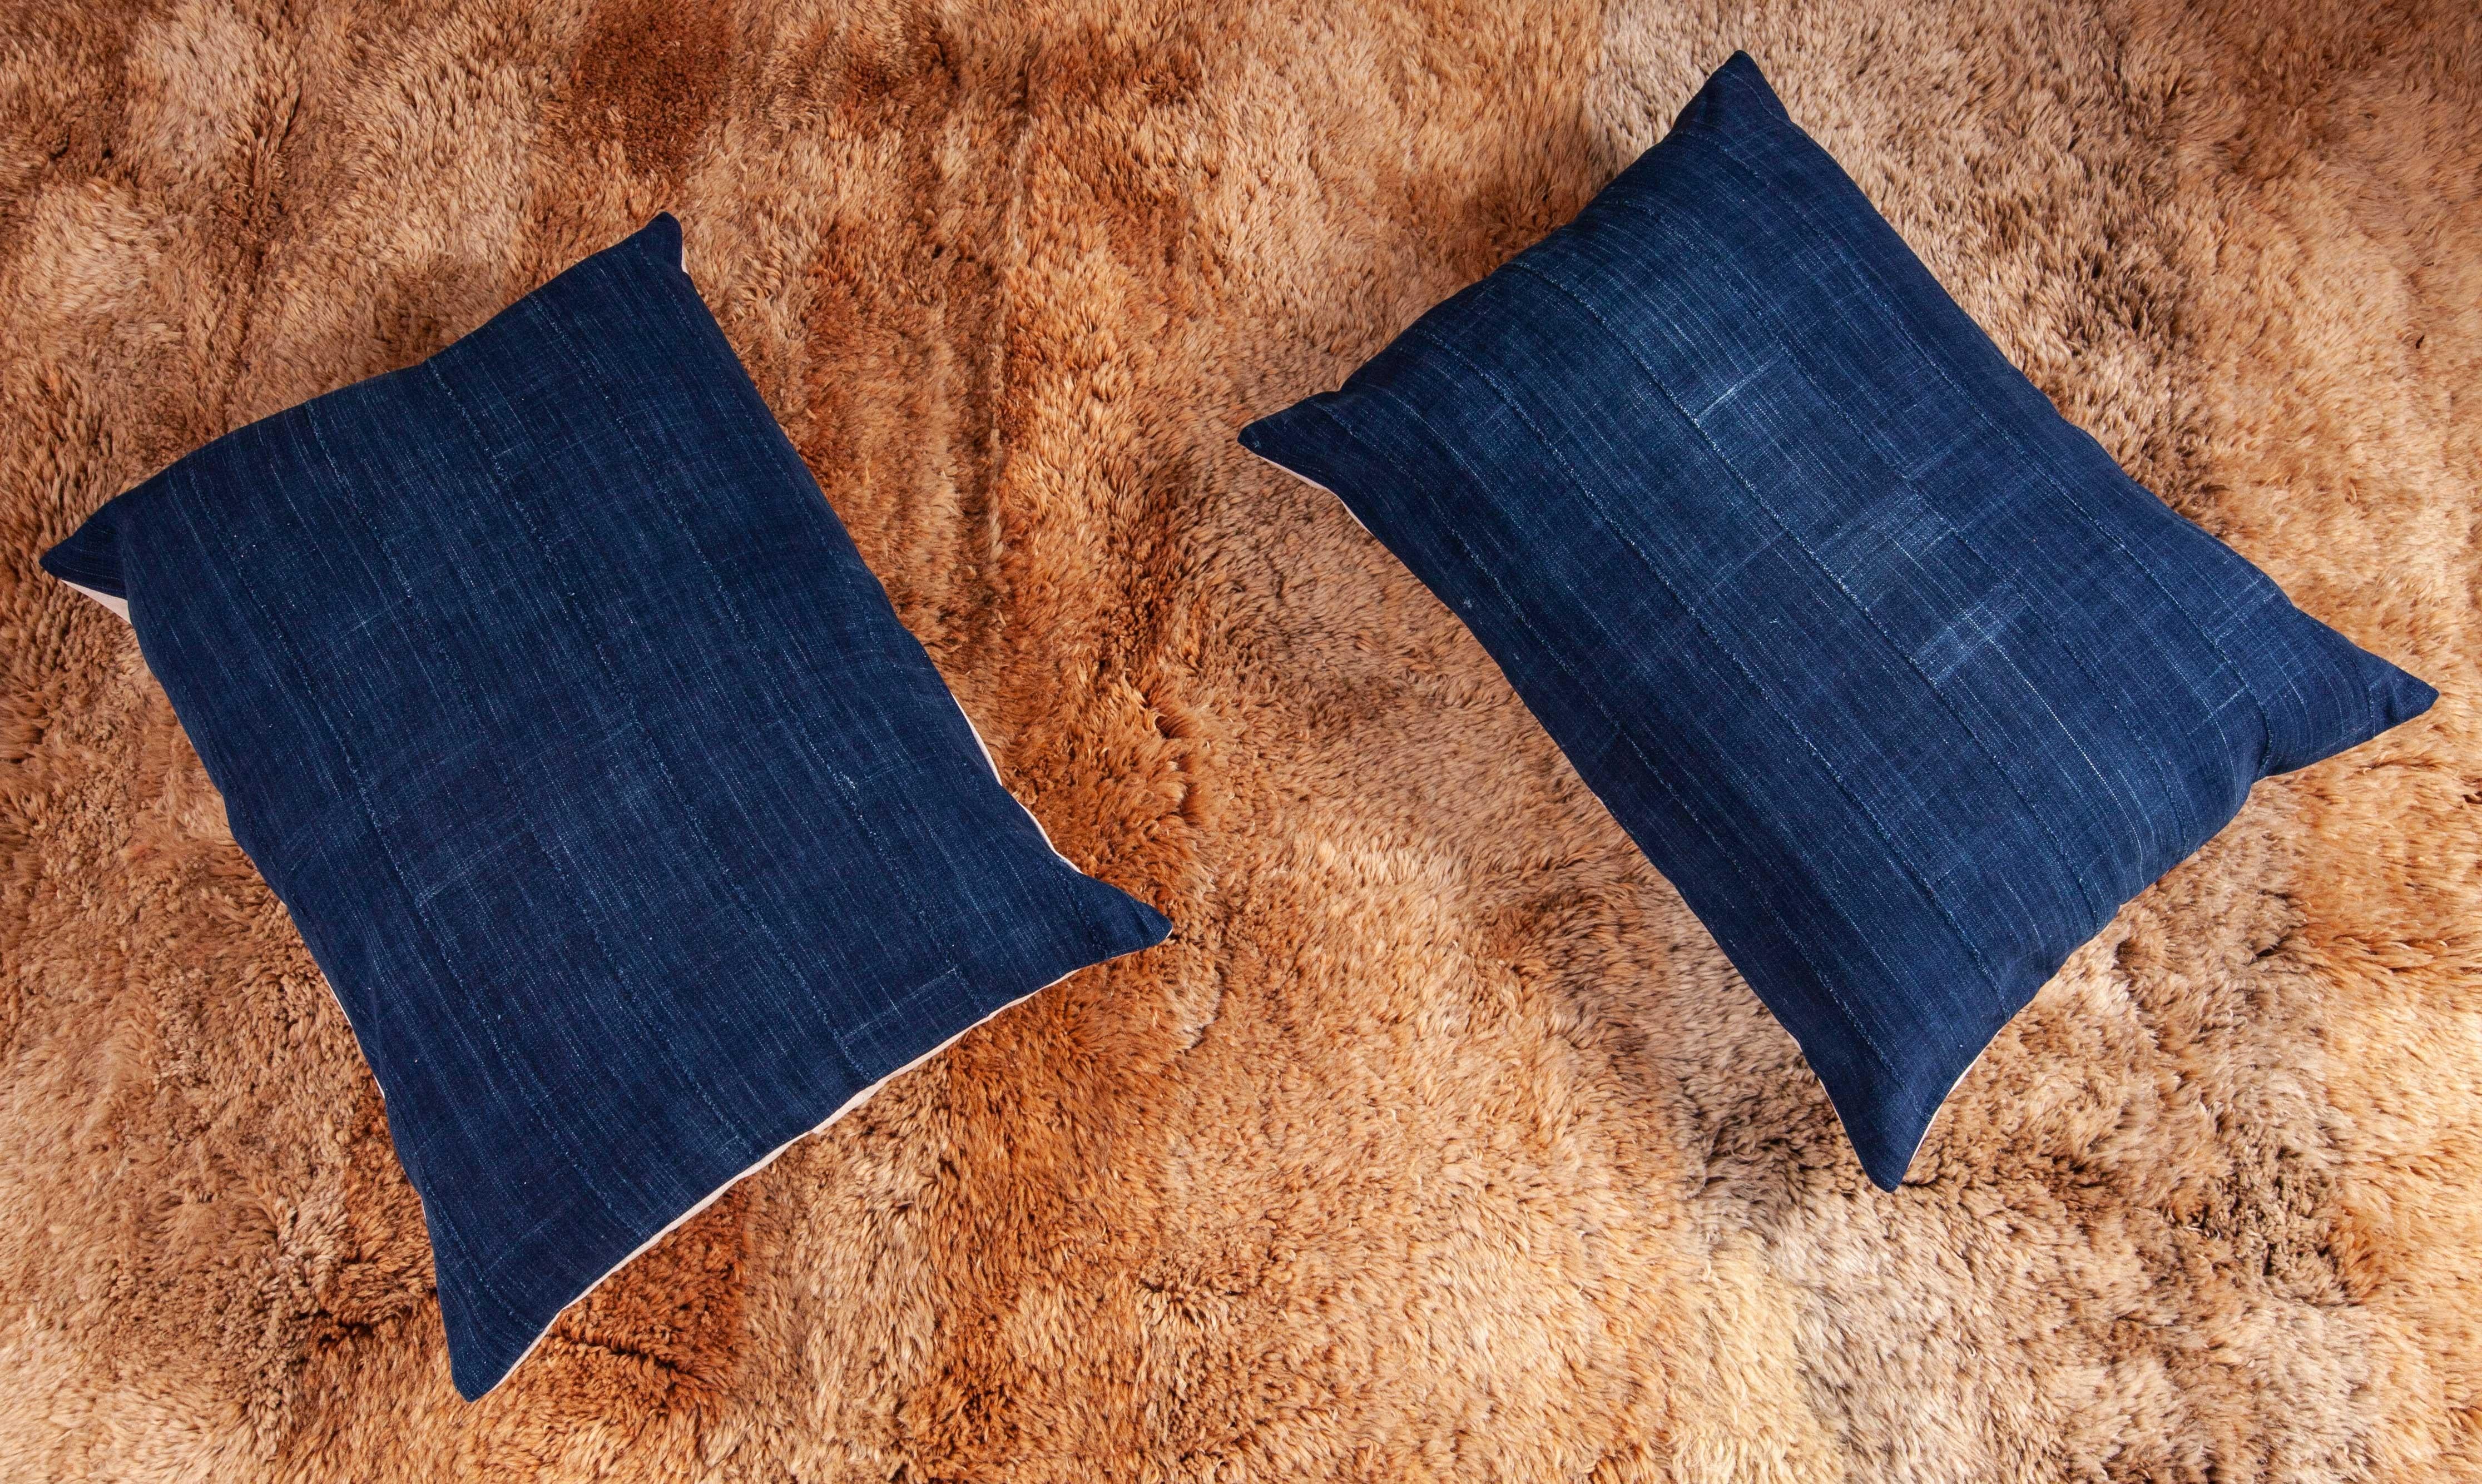 Vintage Indigo Pilow / Cushion Covers Fashioned from a Cloth from Mali Africa 1